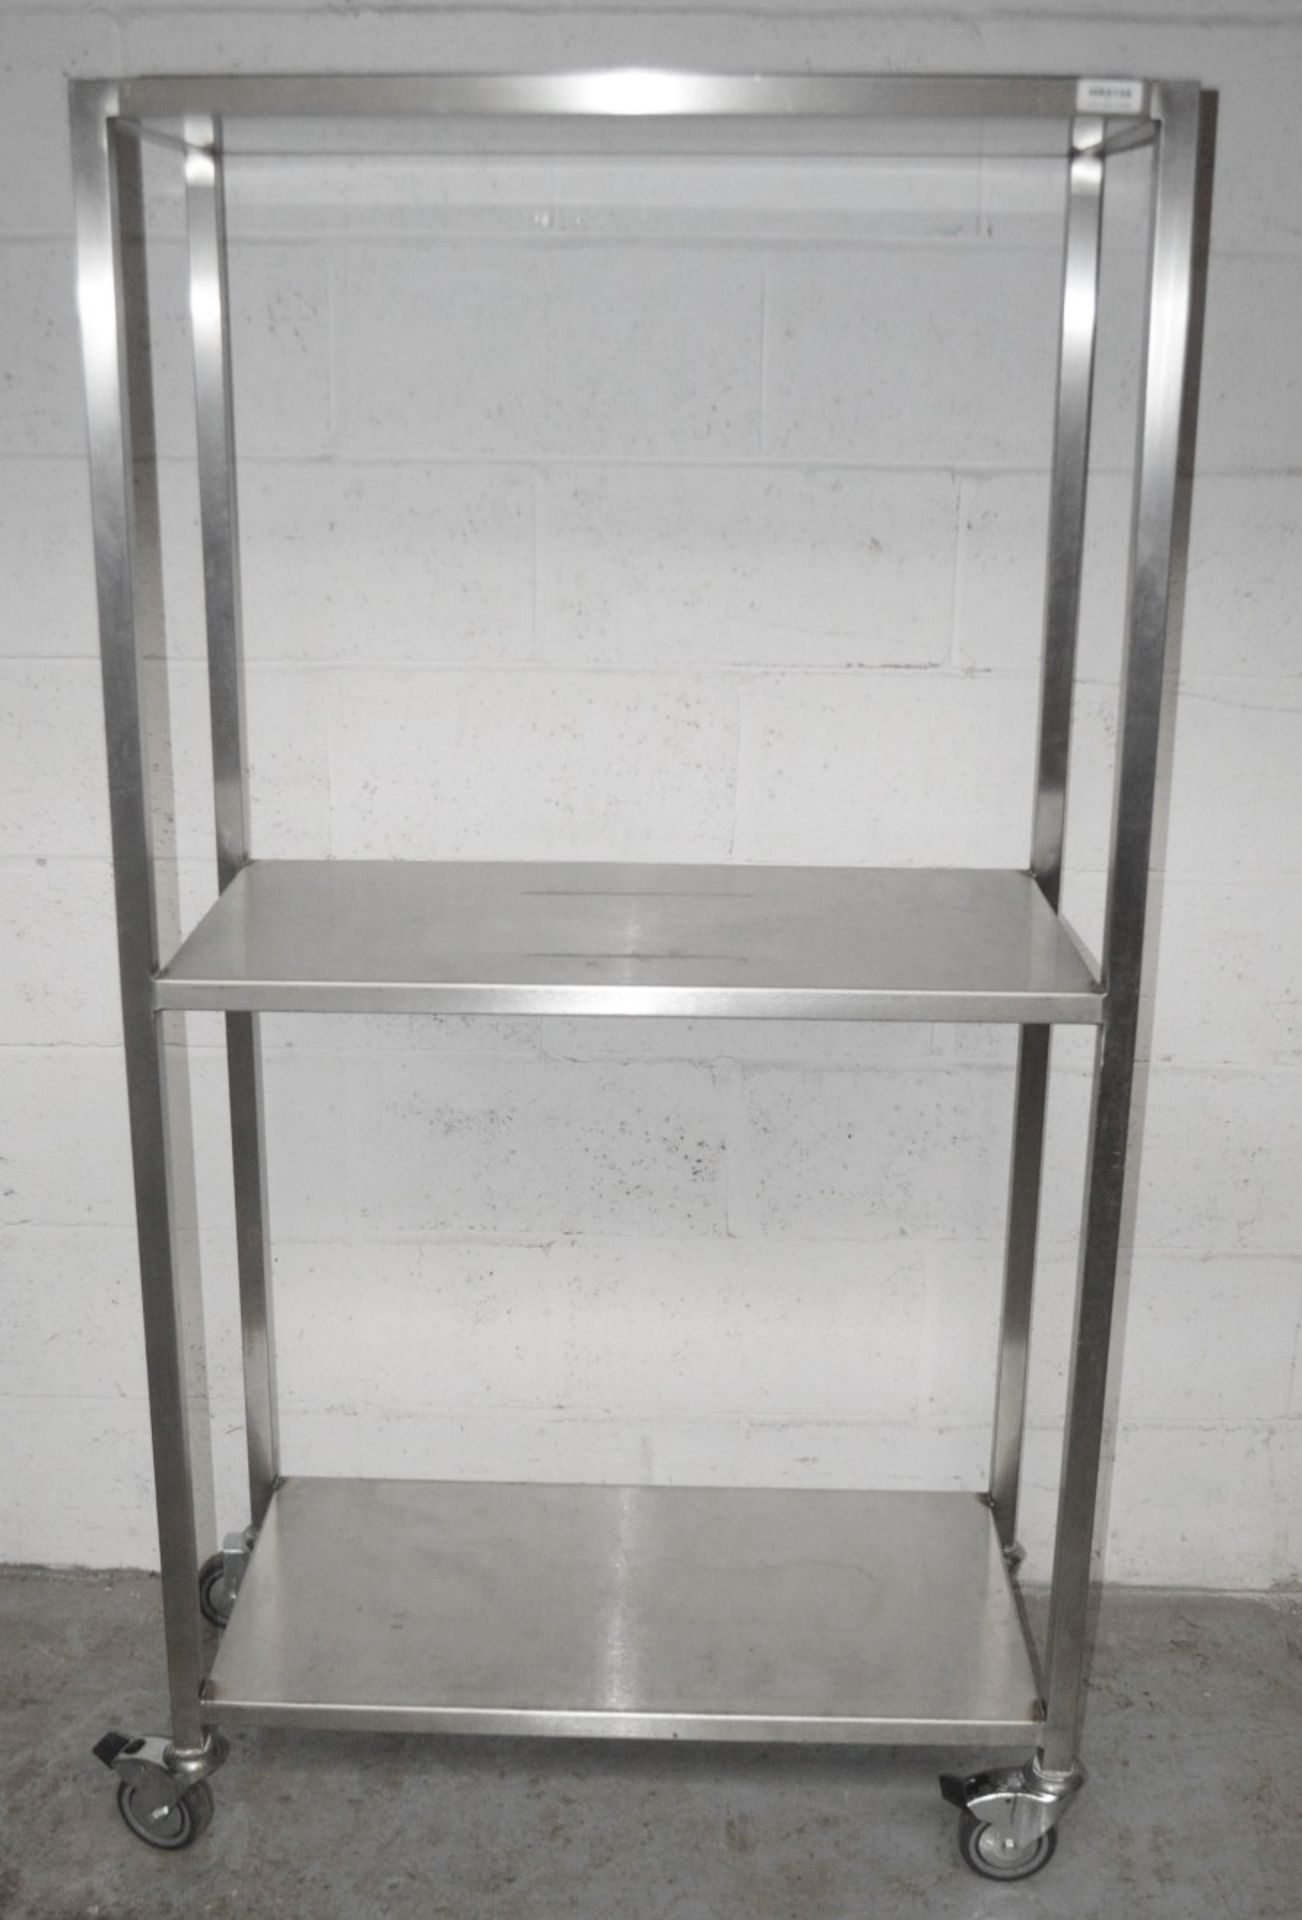 1 x Stainless Steel Commercial Kitchen 3-Tier Shelving Unit On Castors - Dimensions: H170 x W90 x - Image 2 of 3